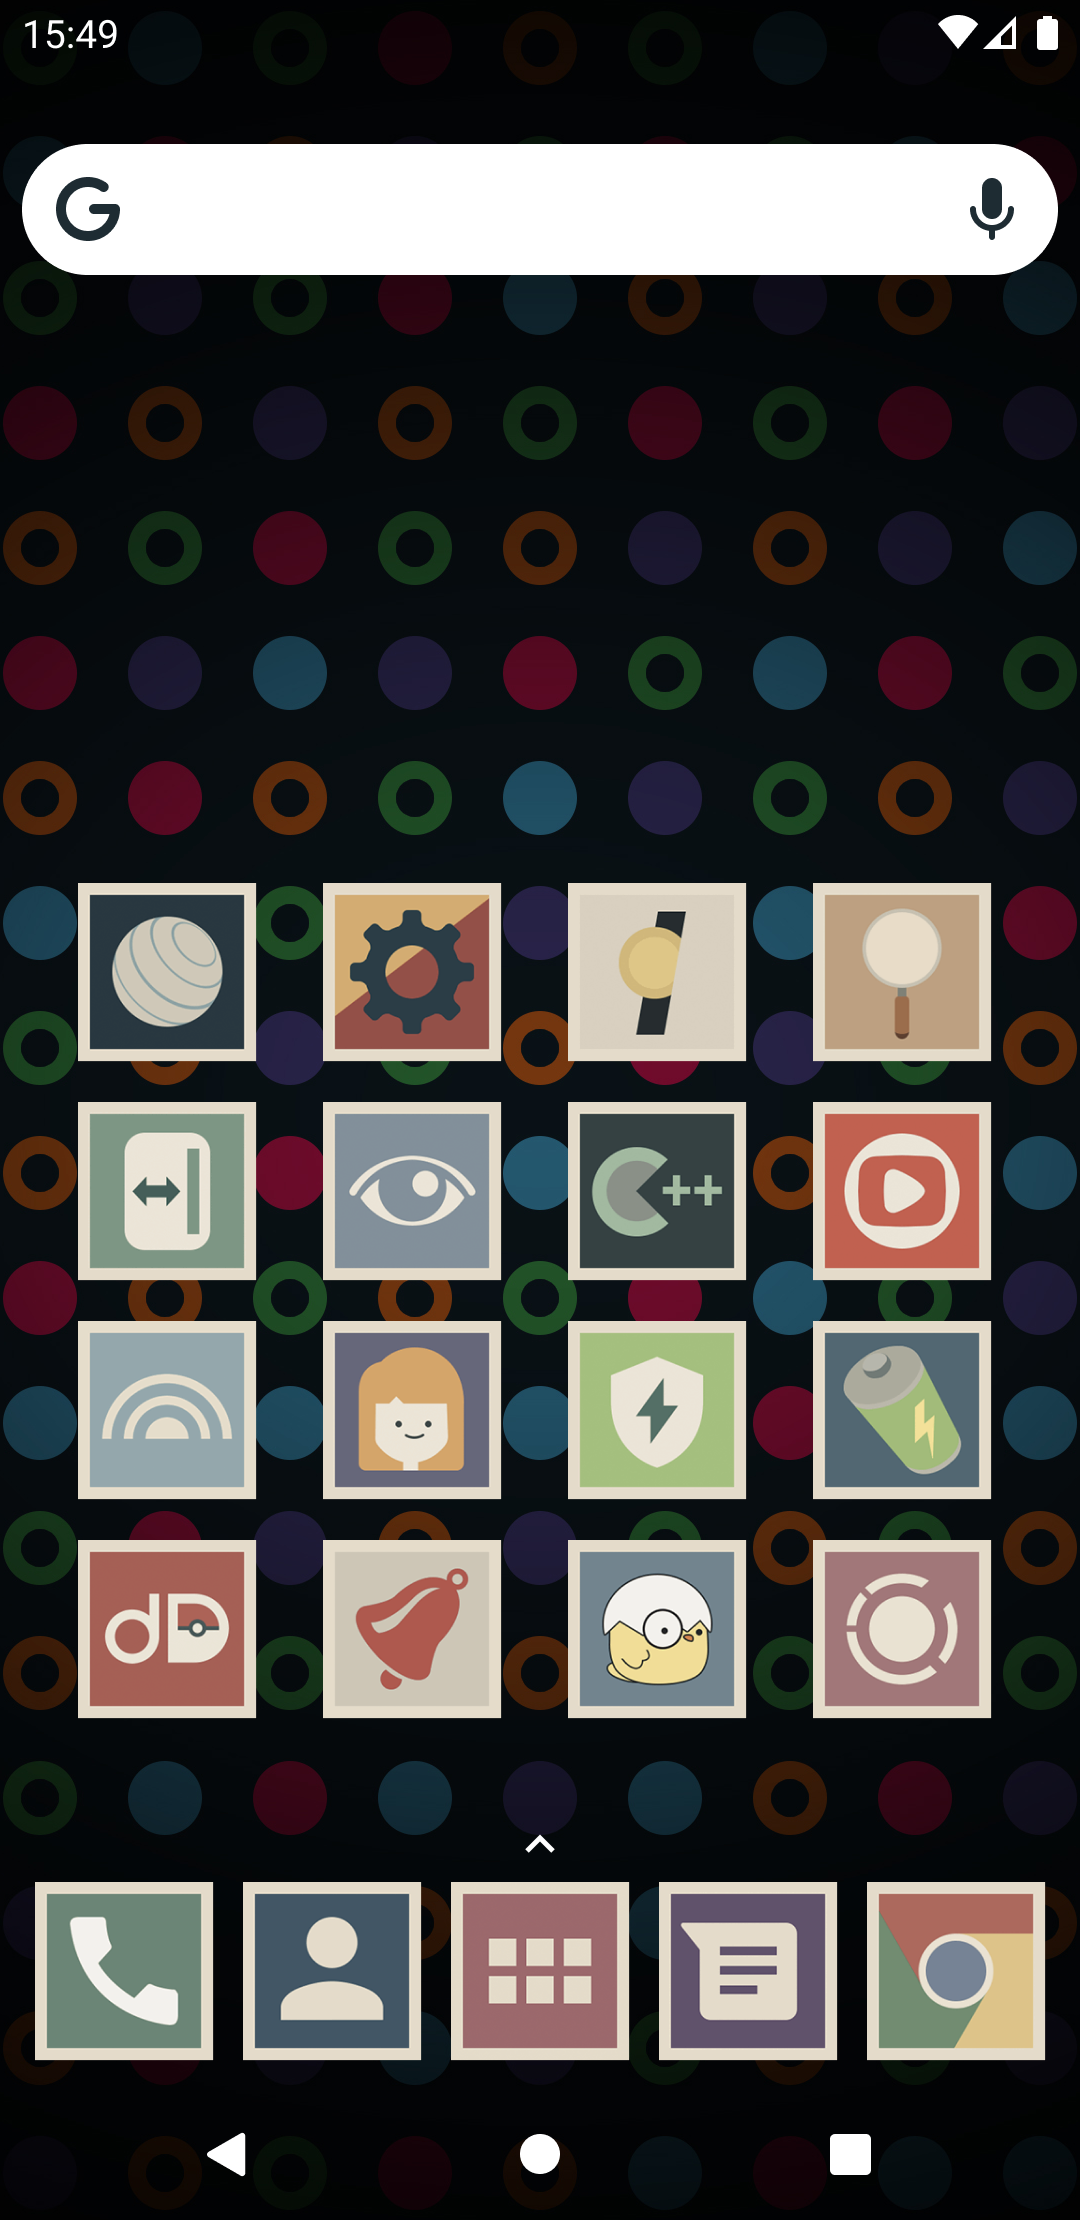 Android application Shimu icon pack screenshort